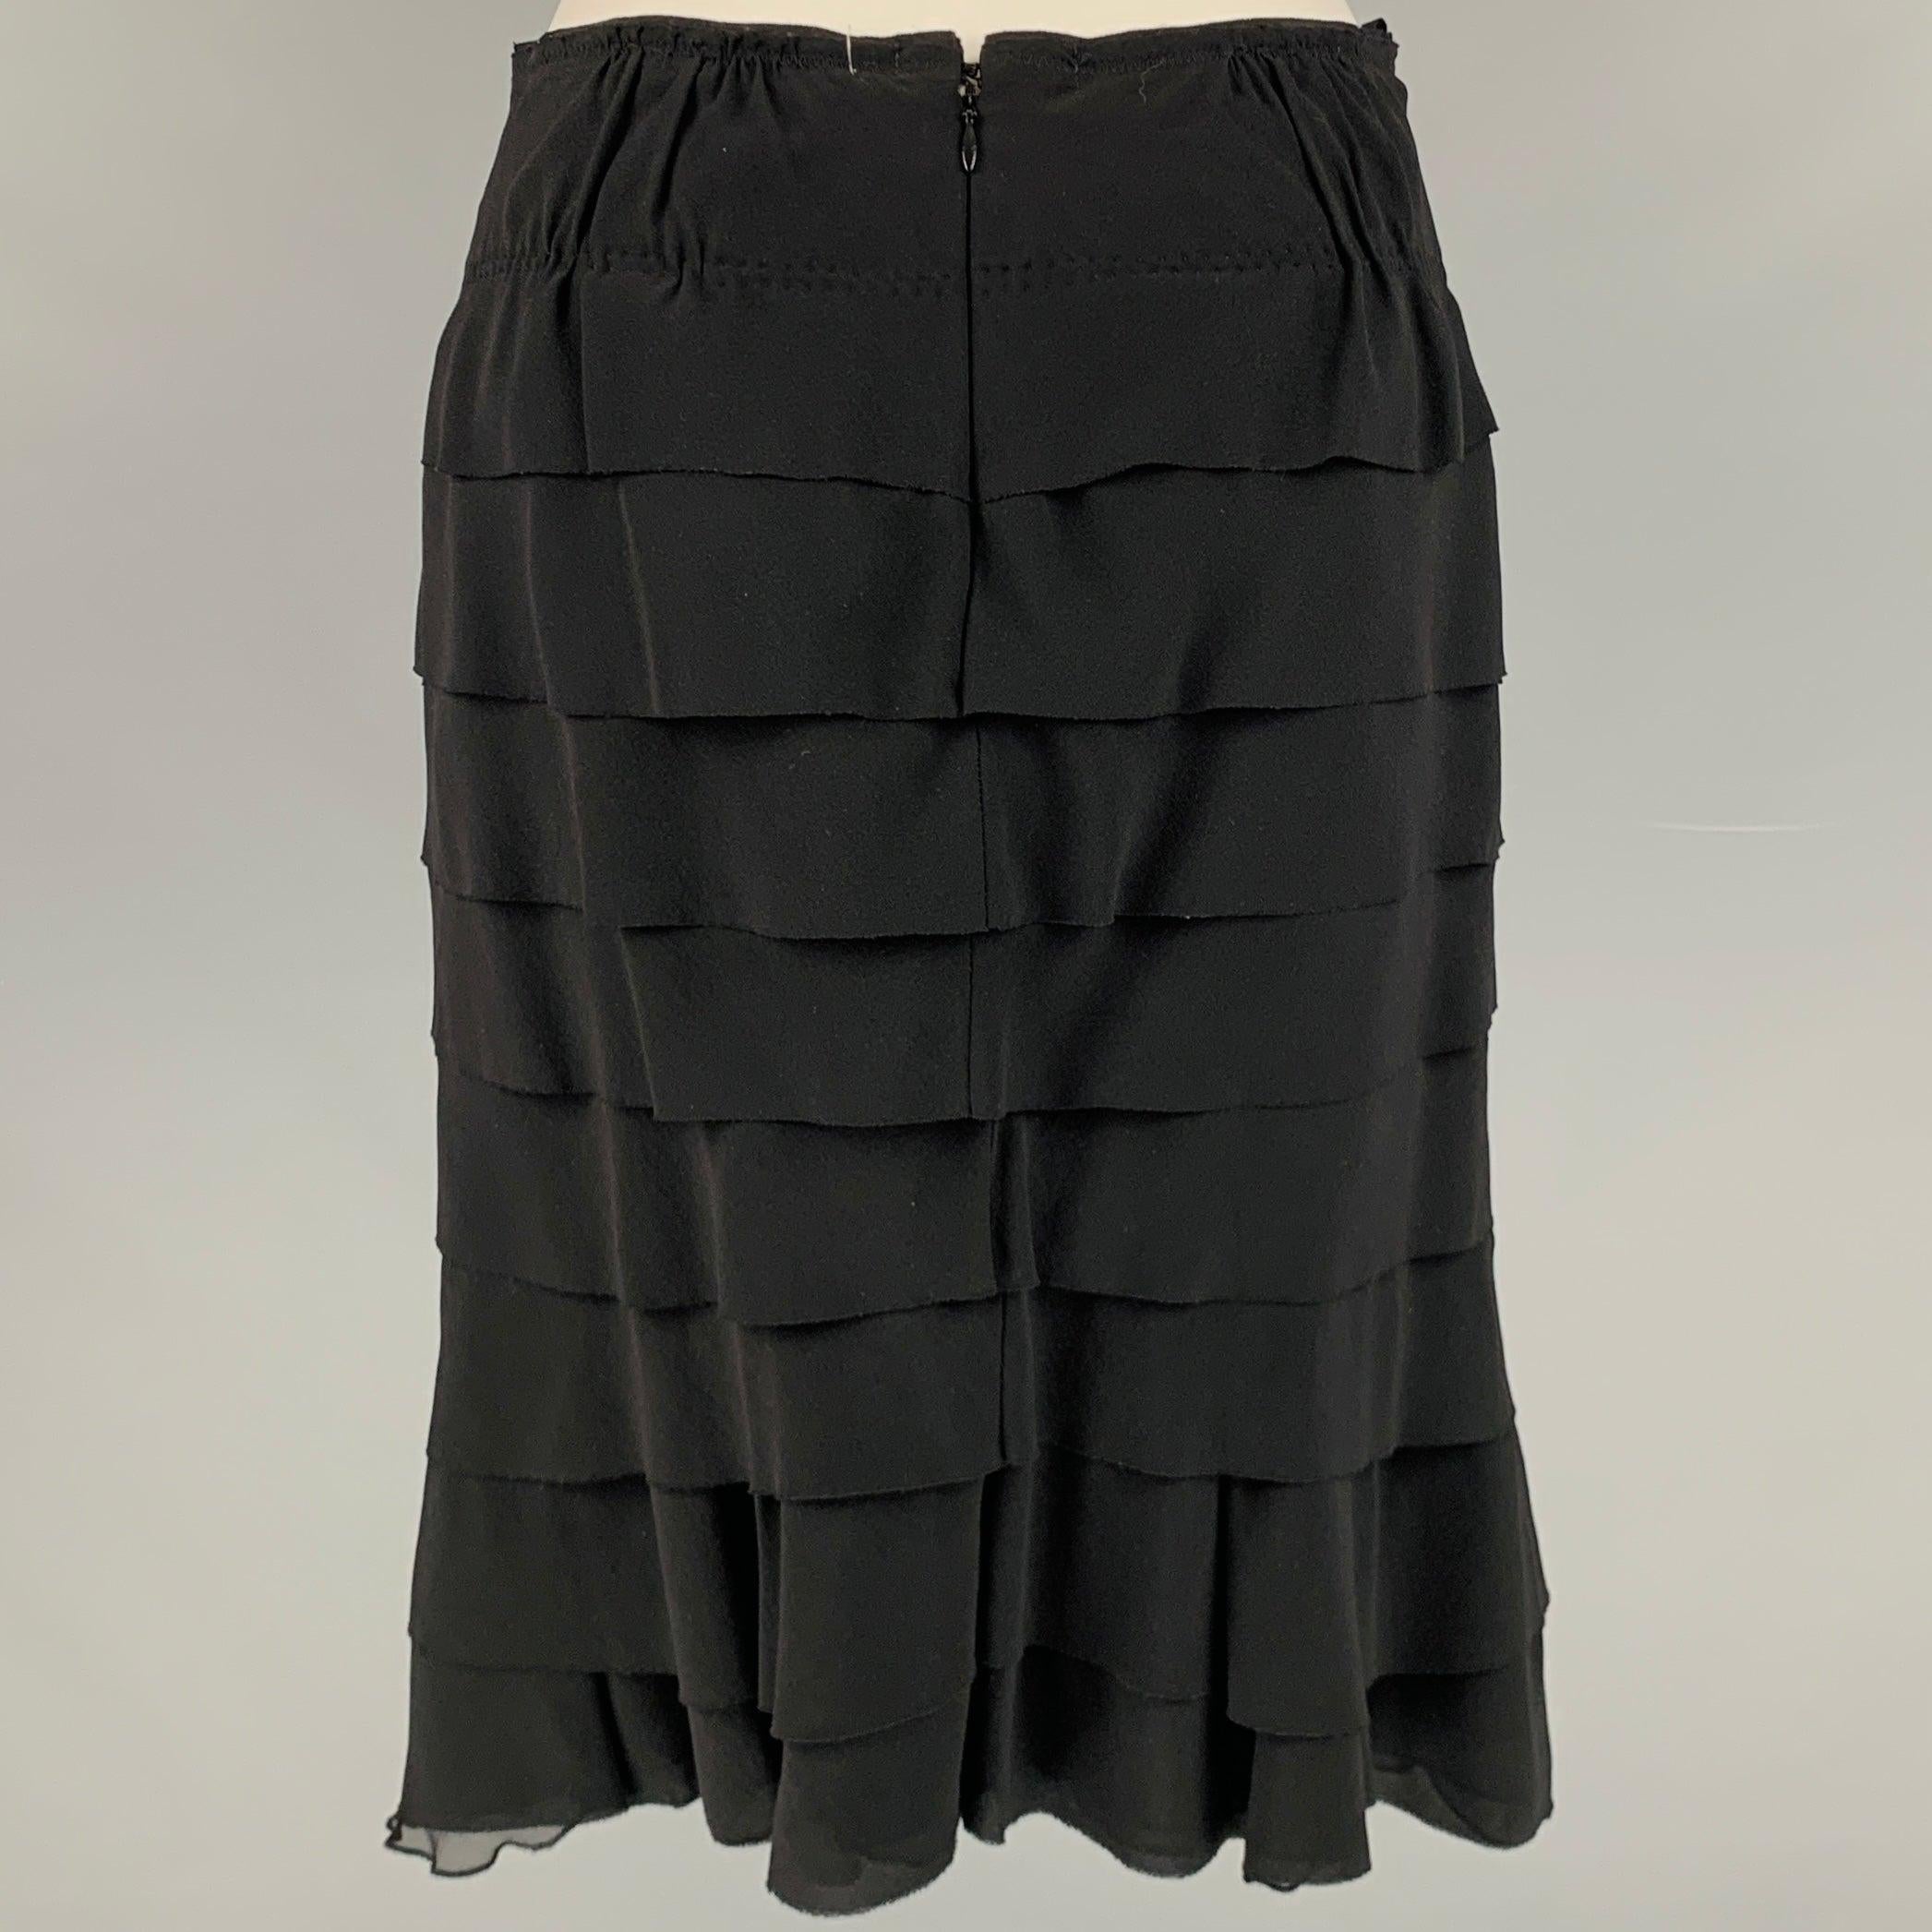 NINA RICCI skirt in a black silk fabric featuring a pencil style, ruffle design, and back zipper closure. Made in France.Excellent Pre-Owned Condition. 

Marked:   38 

Measurements: 
  Waist: 27 inches Hip: 34 inches Length: 22.5 inches 
  
  
